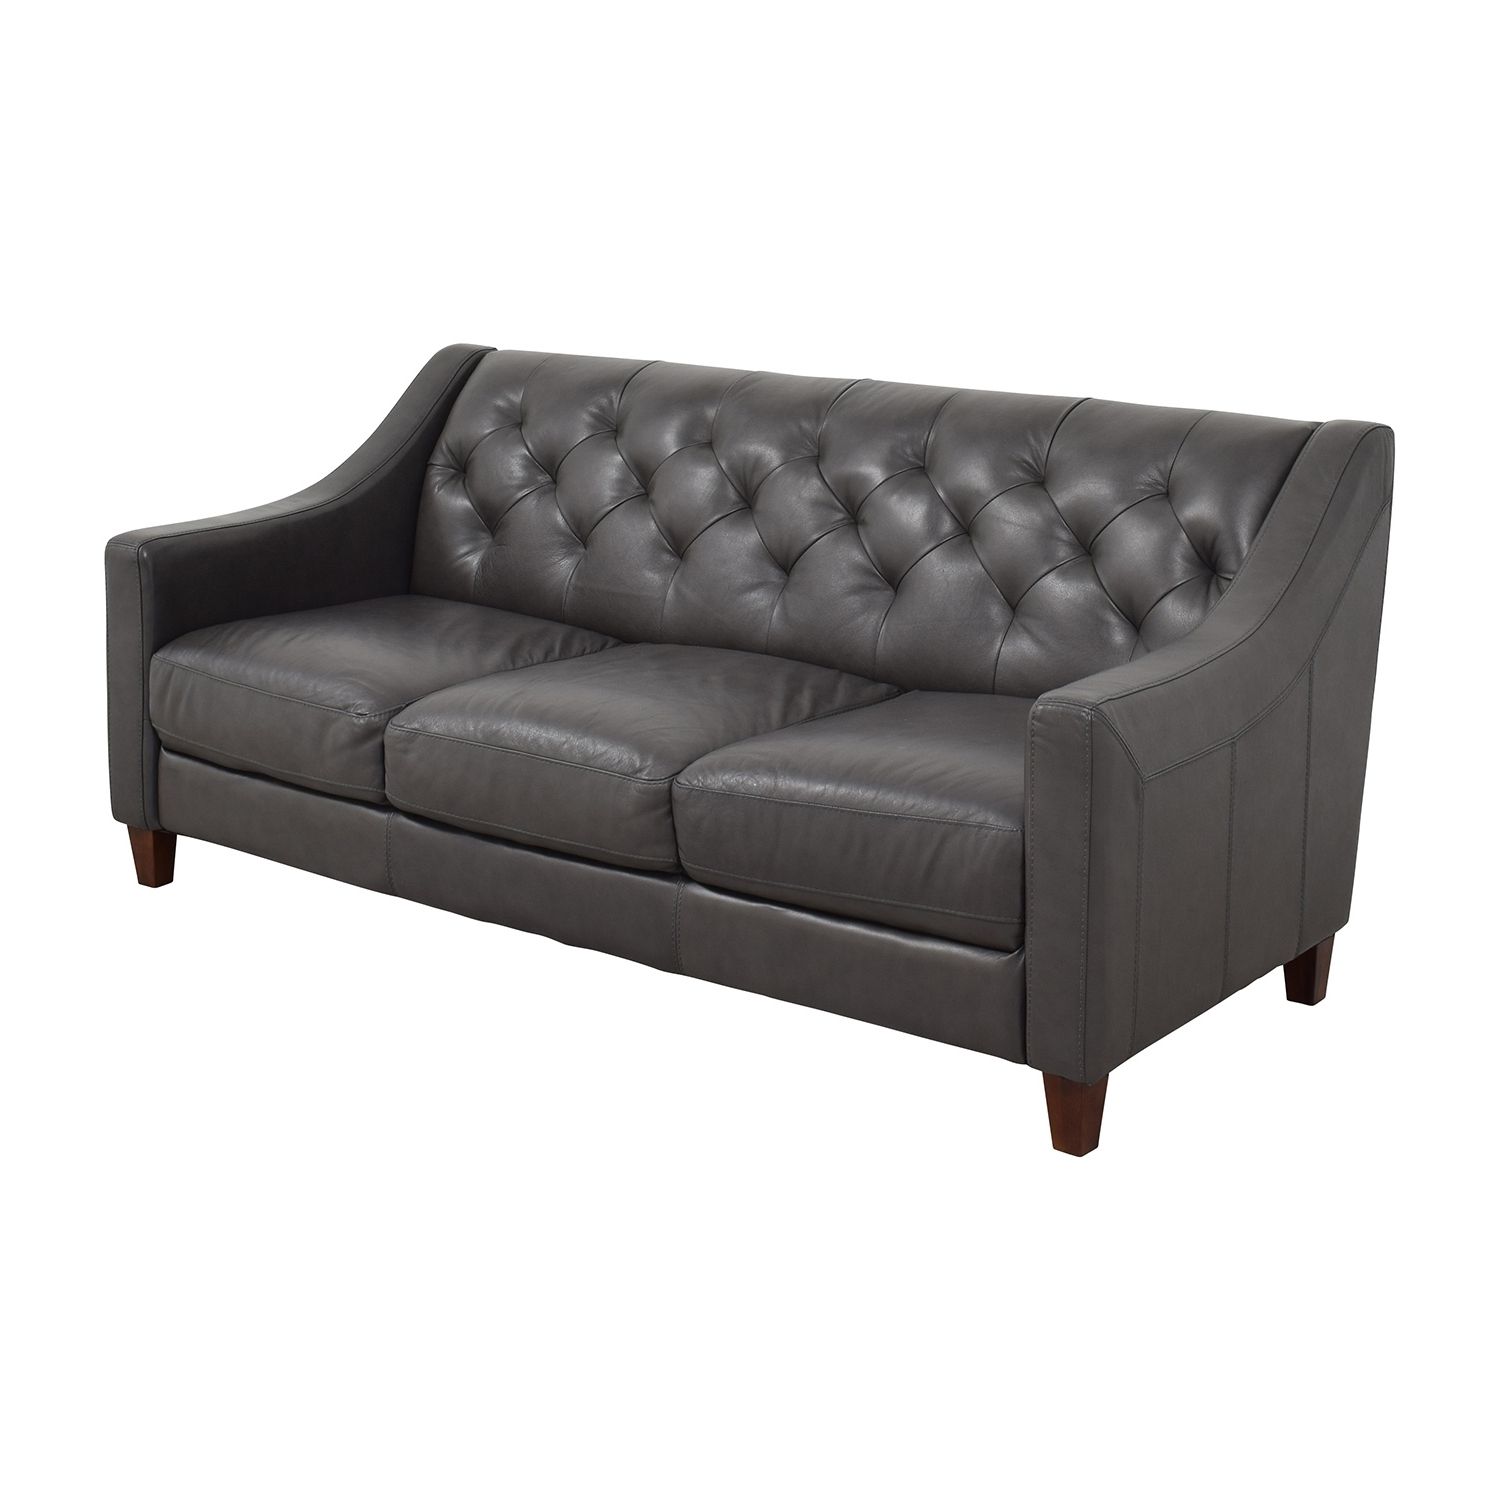 Macys Leather Sofa And Loveseat • Leather Sofa Throughout Preferred Macys Leather Sofas (View 4 of 15)